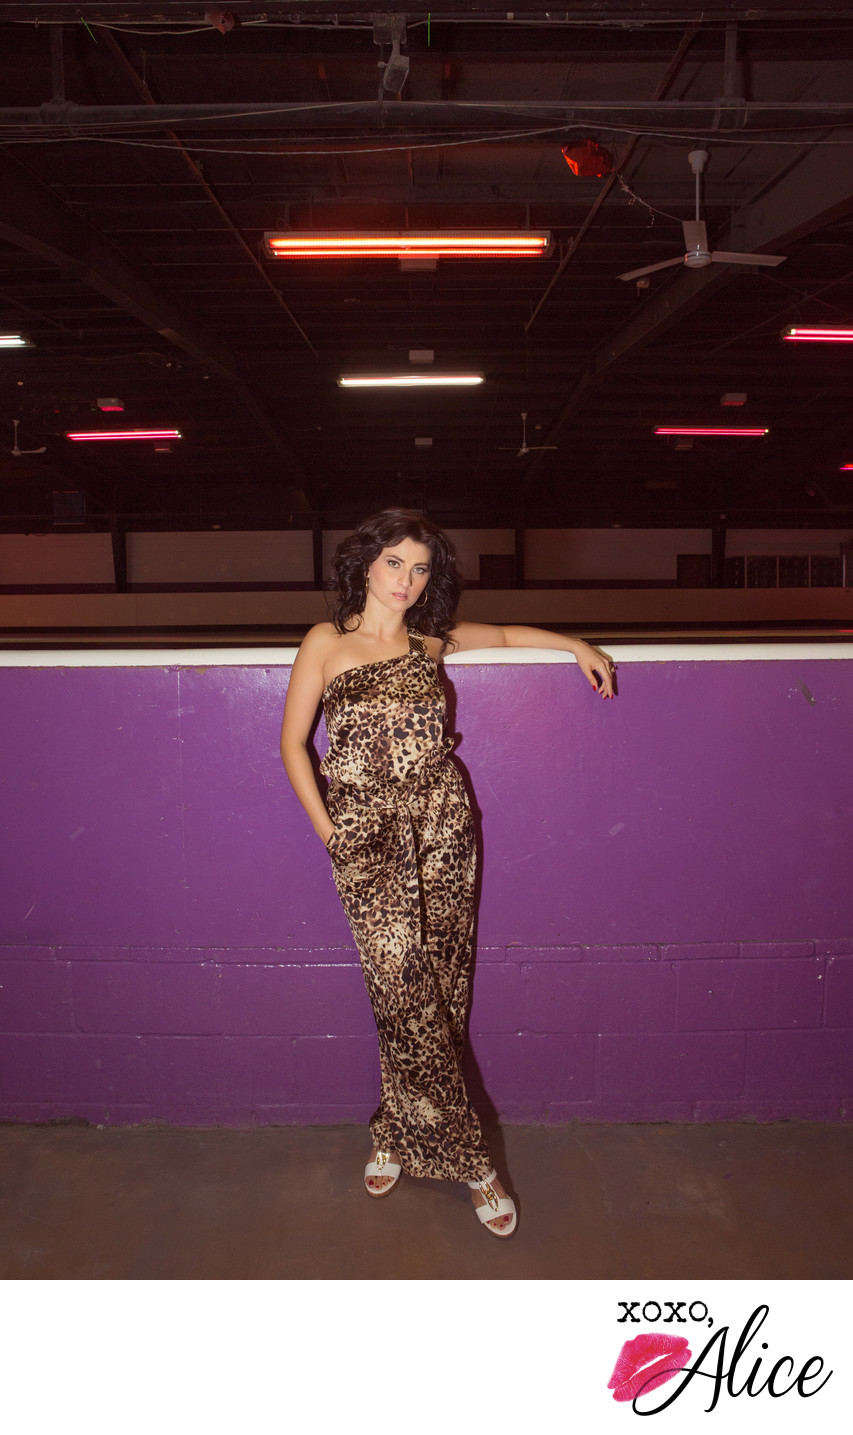 themed glamour photos 1970s roller rink jumper